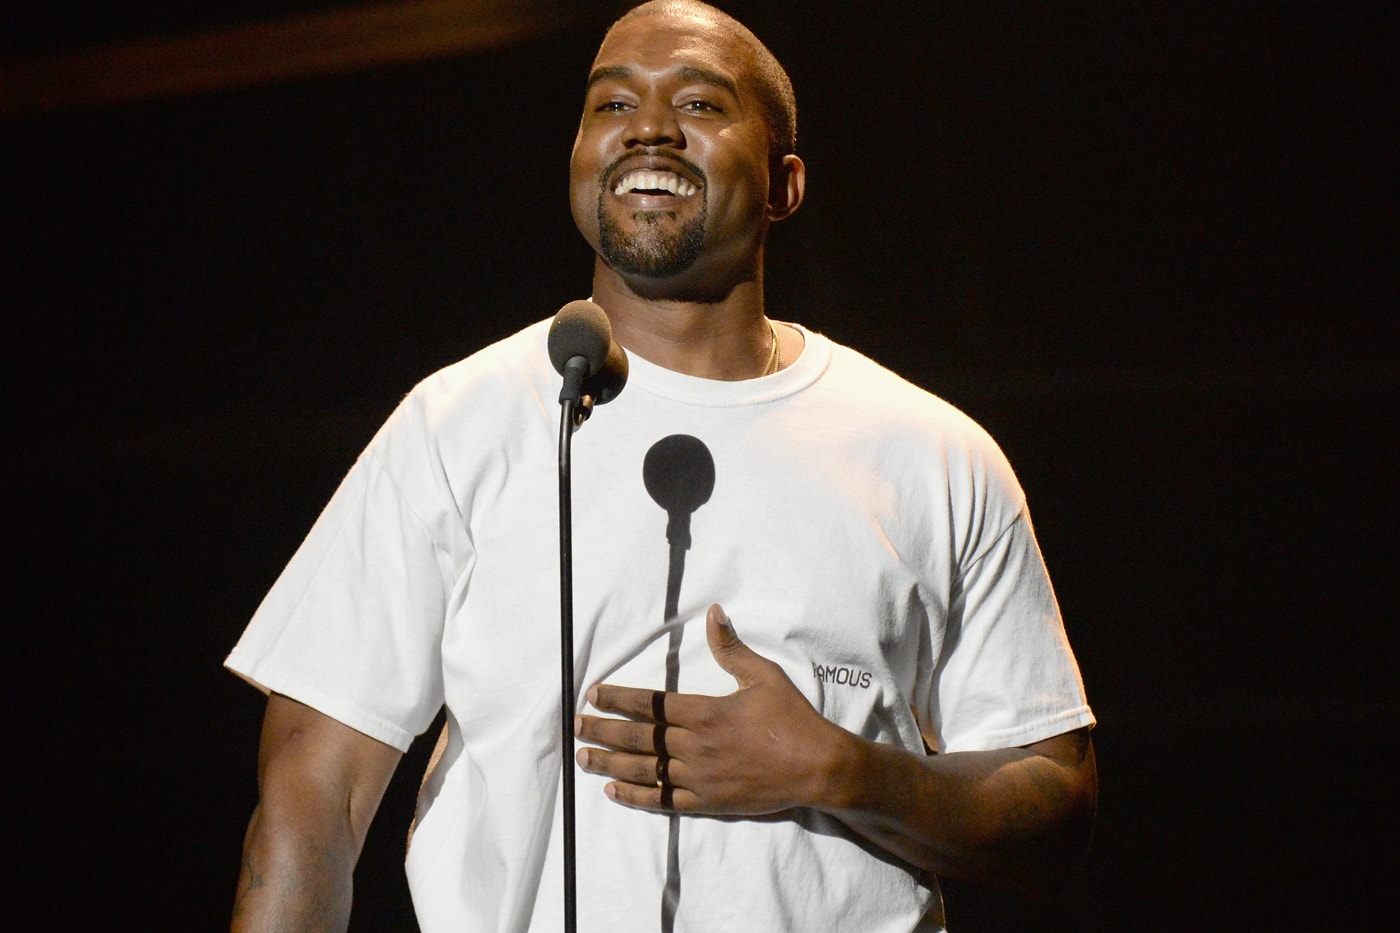 kanye-west-launches-his-own-site-selling-yeezy-shoes-and-zines